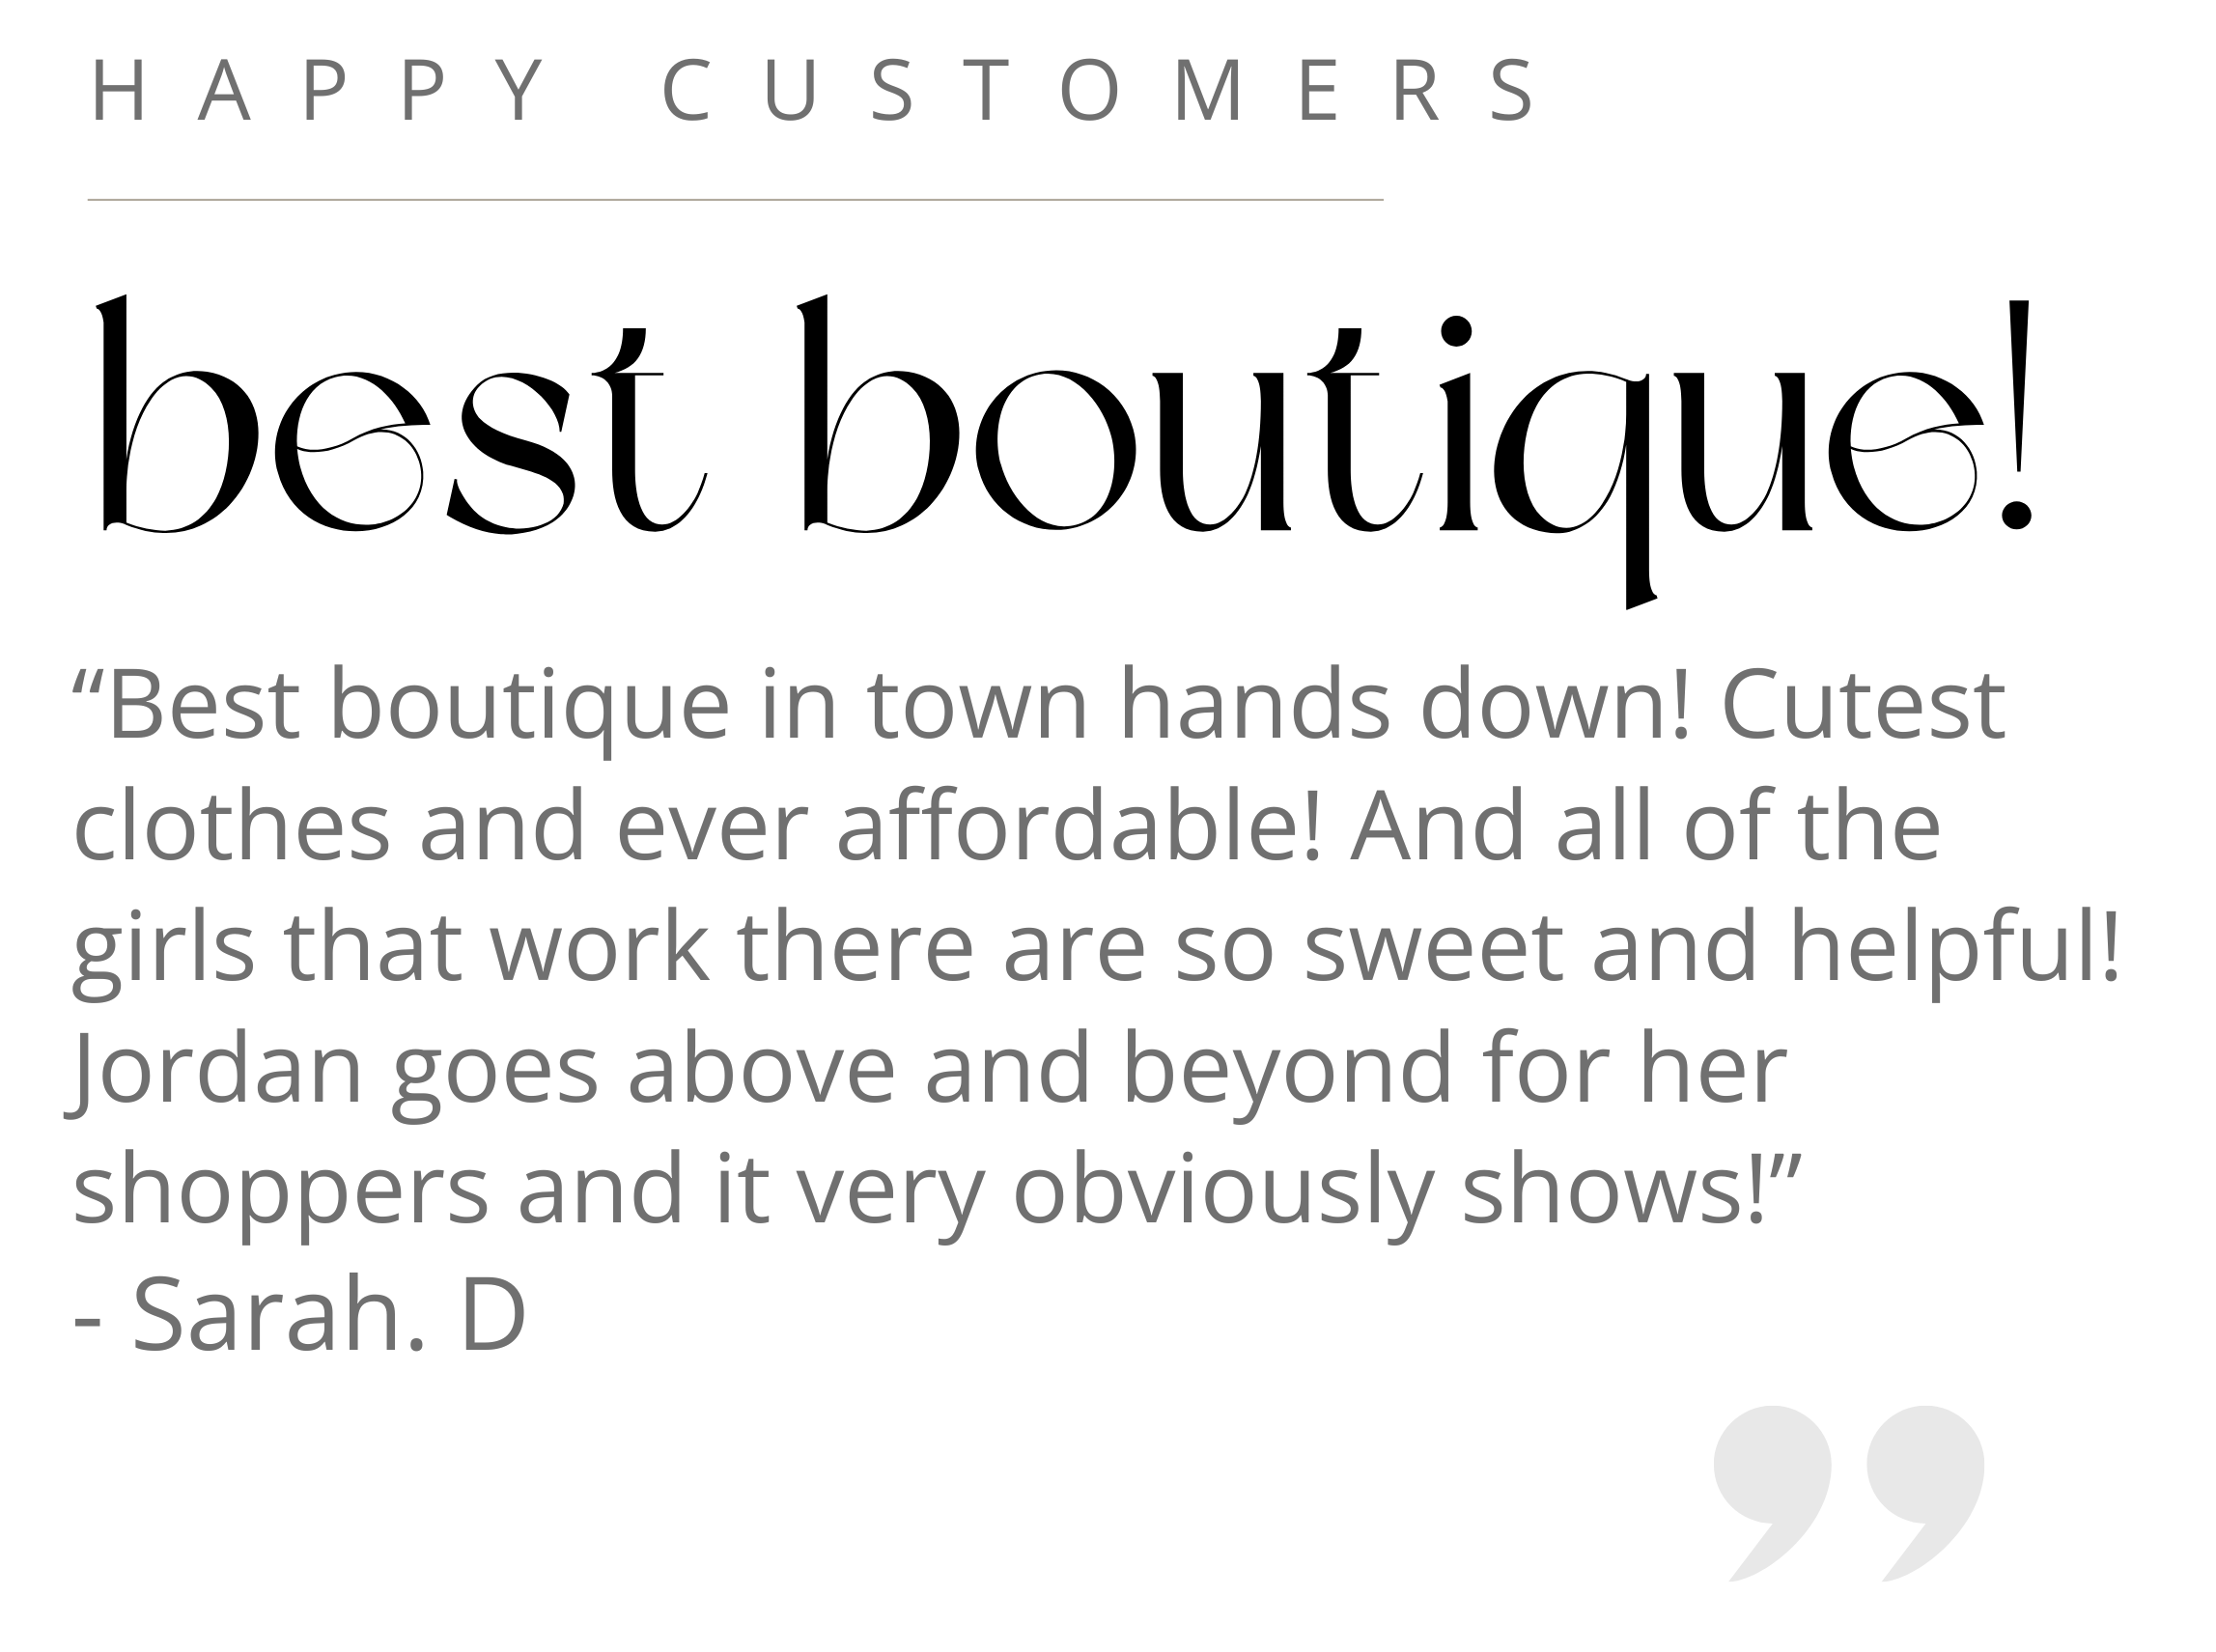 Happy Customers Best Boutique!